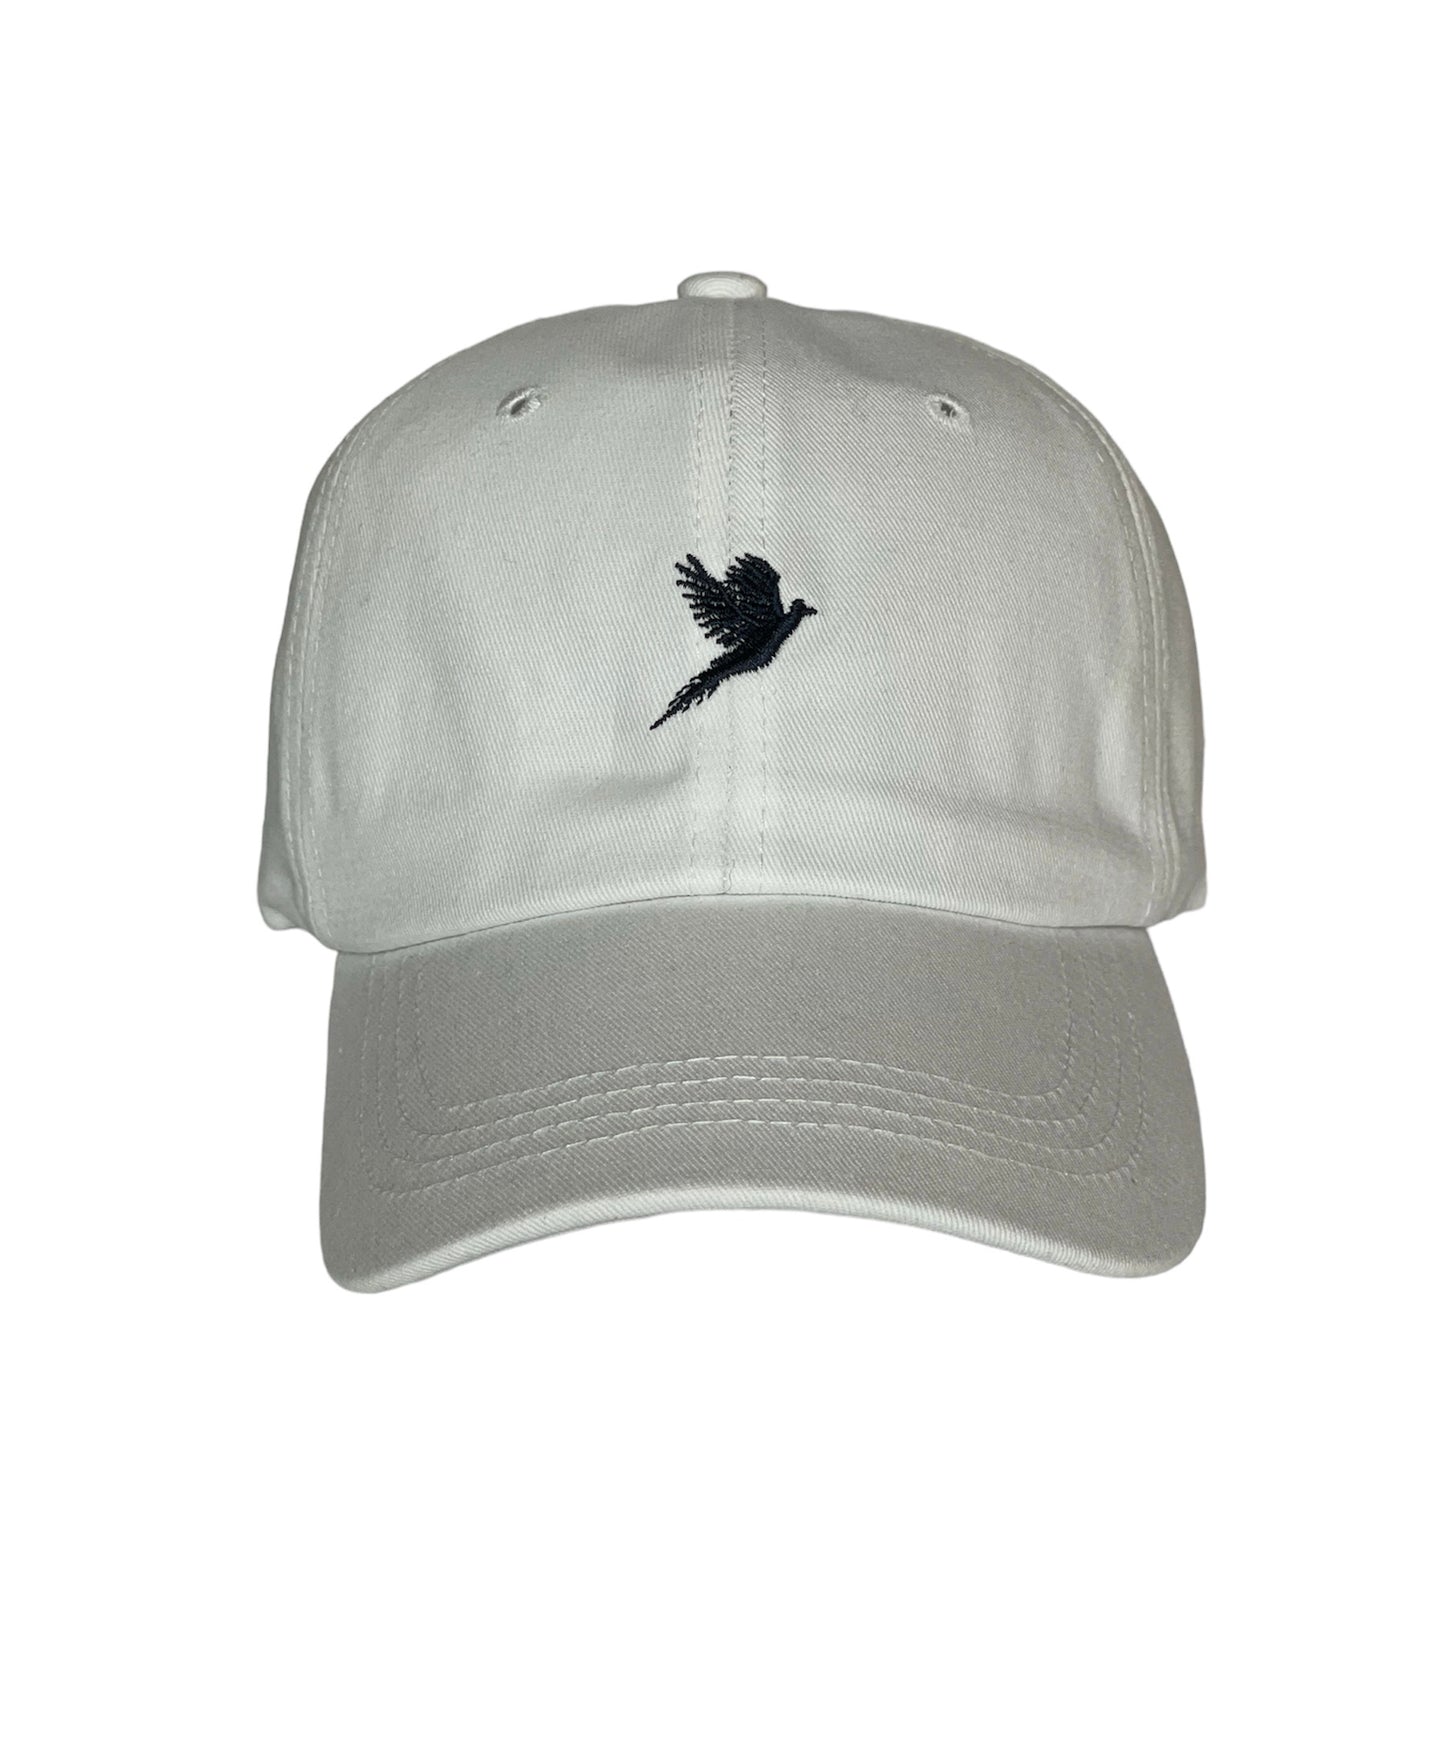 BASEBALL CAP WHITE WITH EMBROIDERED NAVY PHEASANT INSIGNIA